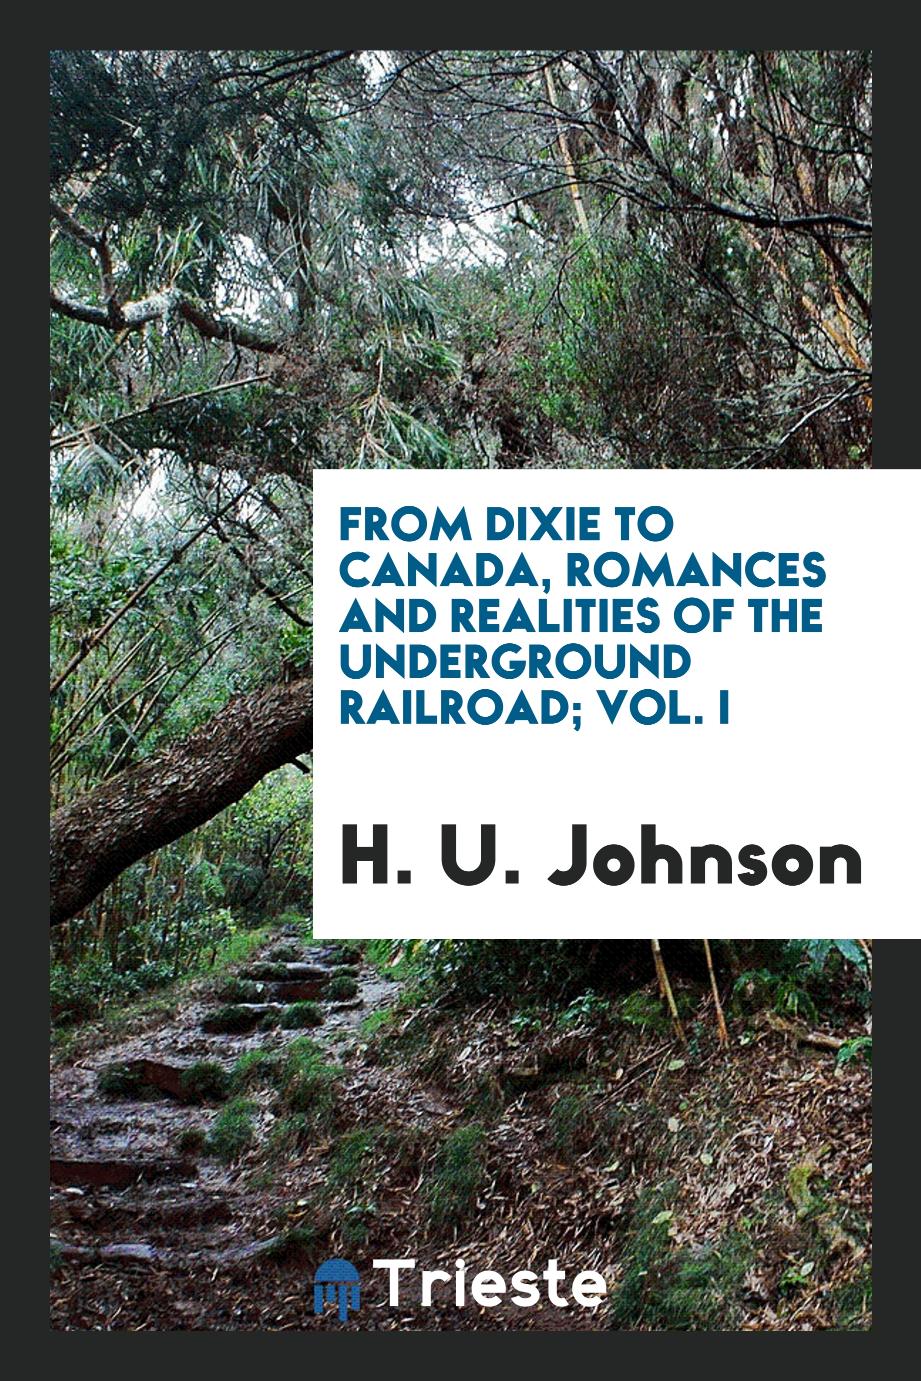 From Dixie to Canada, romances and realities of the underground railroad; Vol. I